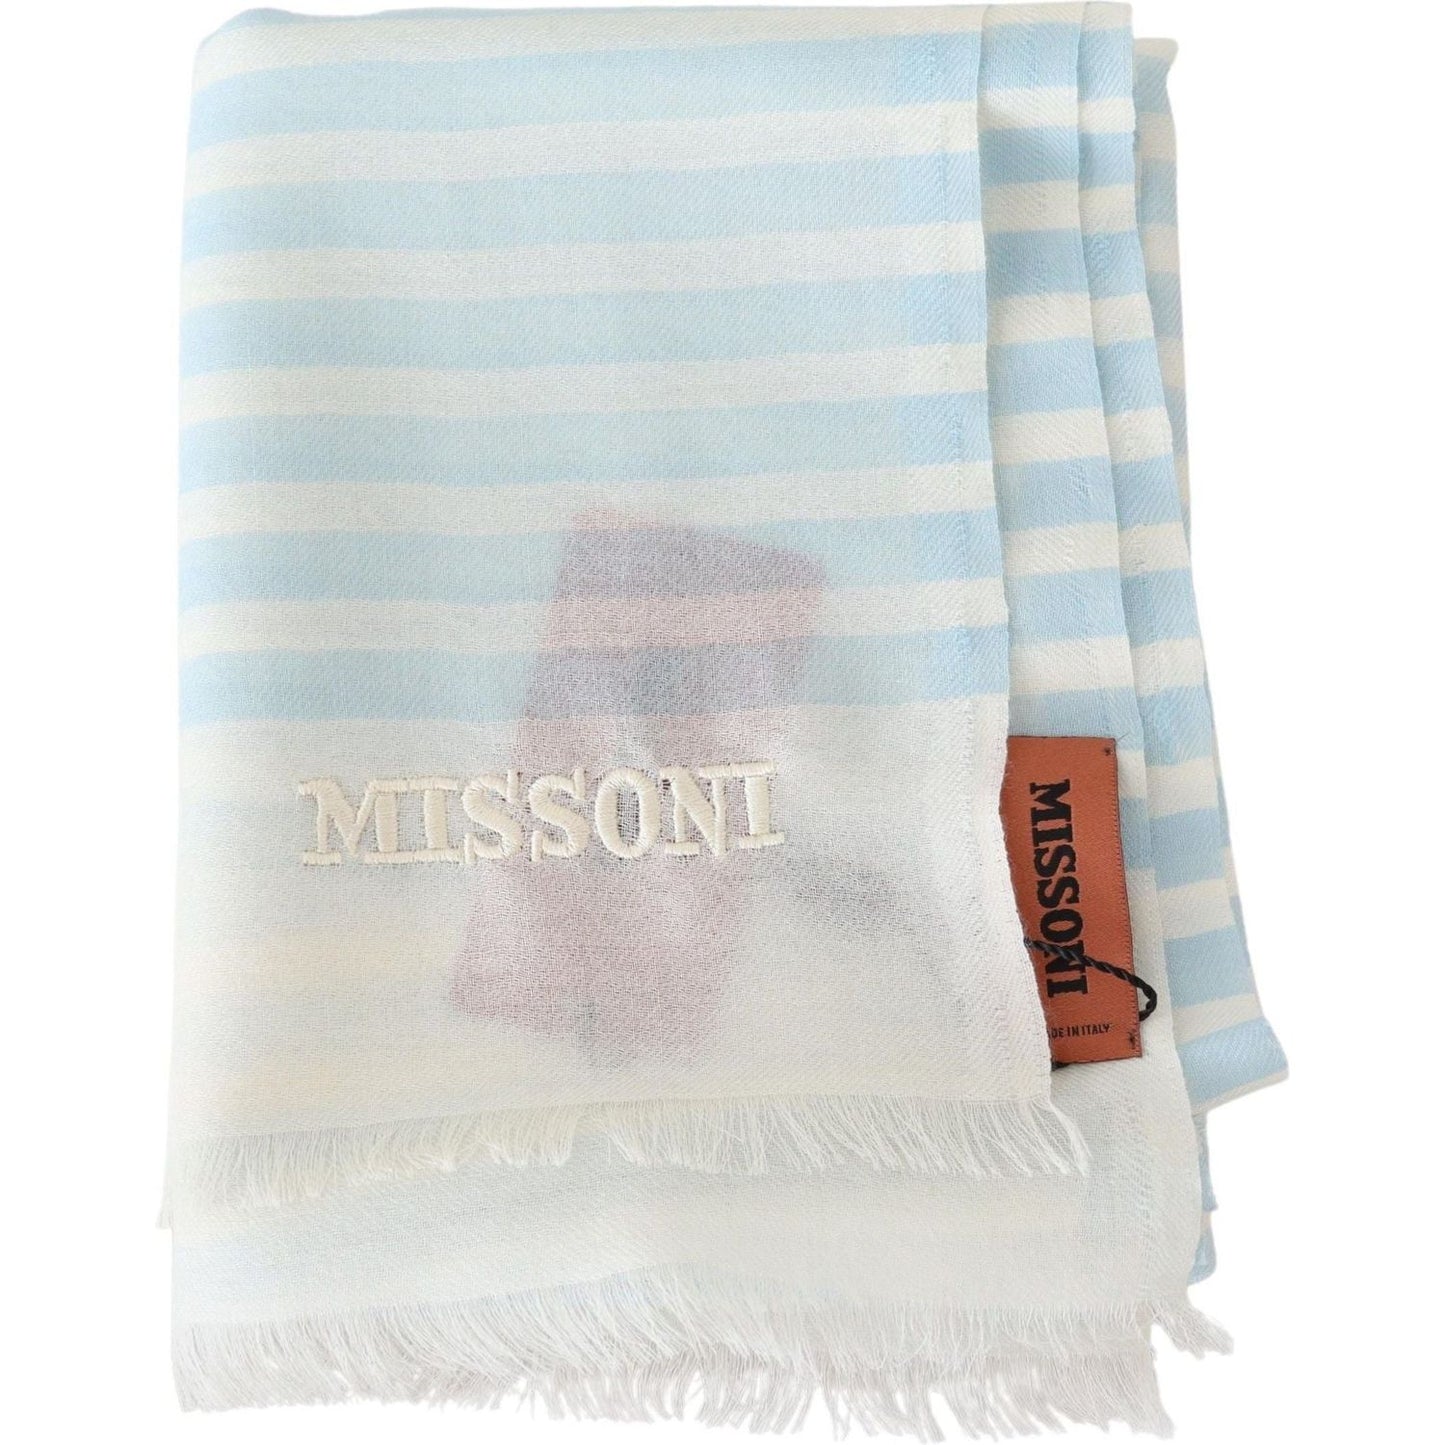 Missoni Elegant Cashmere Scarf with Linear Design blue-white-lined-cashmere-unisex-wrap-scarf